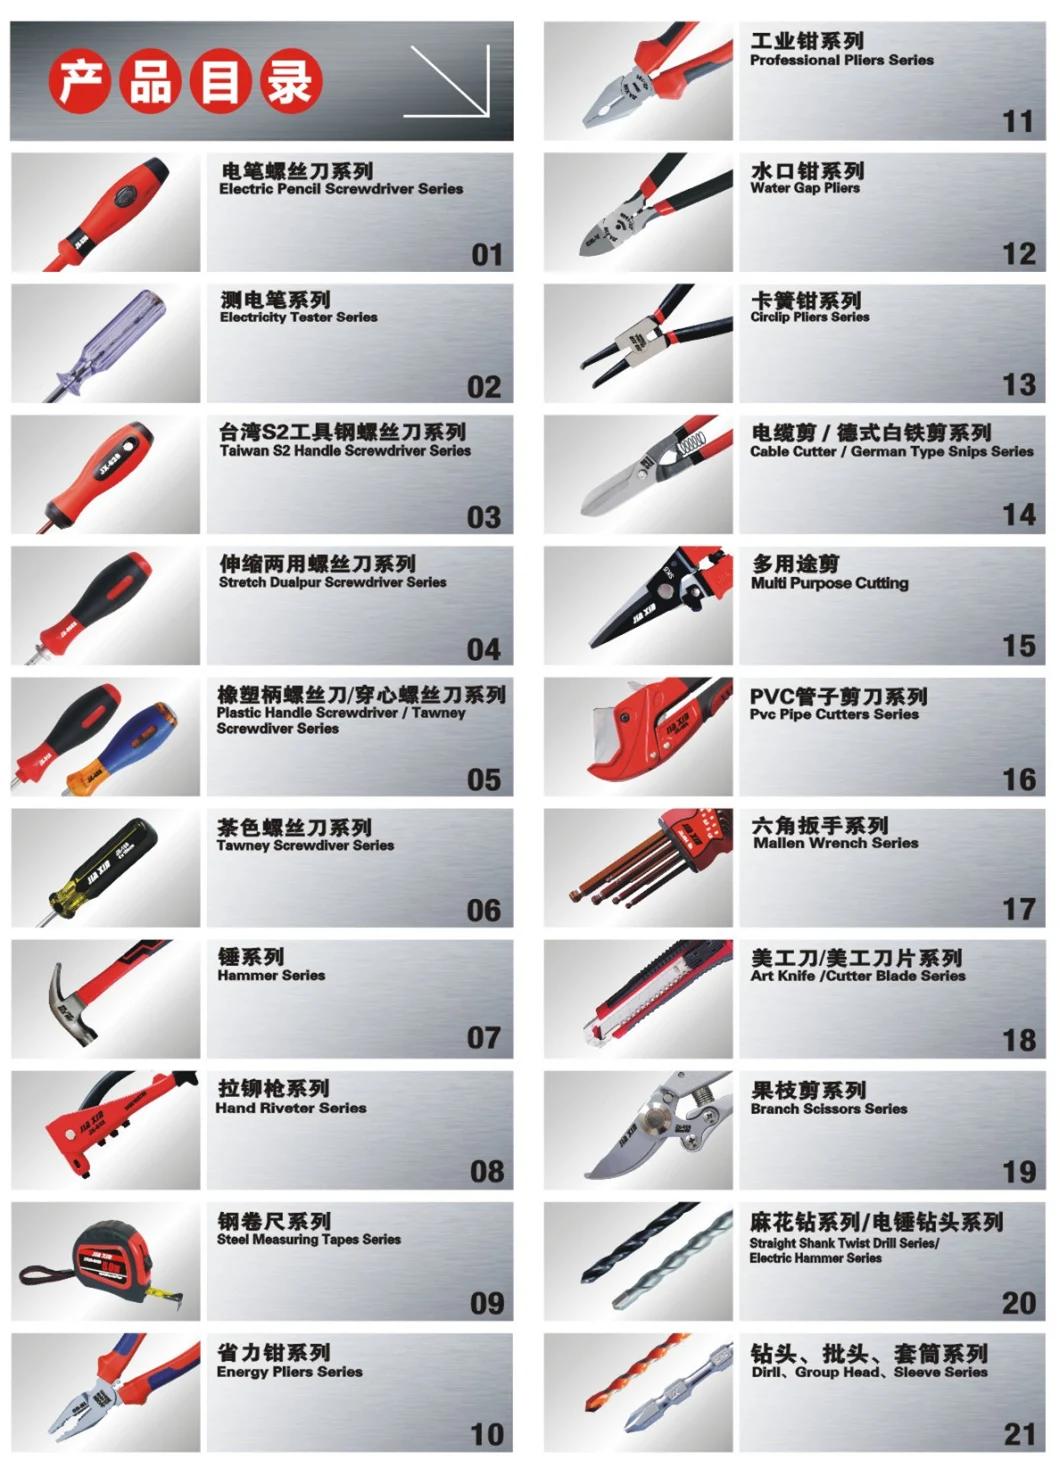 Dual Color High Quality Impact Aftershock Bright Chrome Piercing Screwdriver